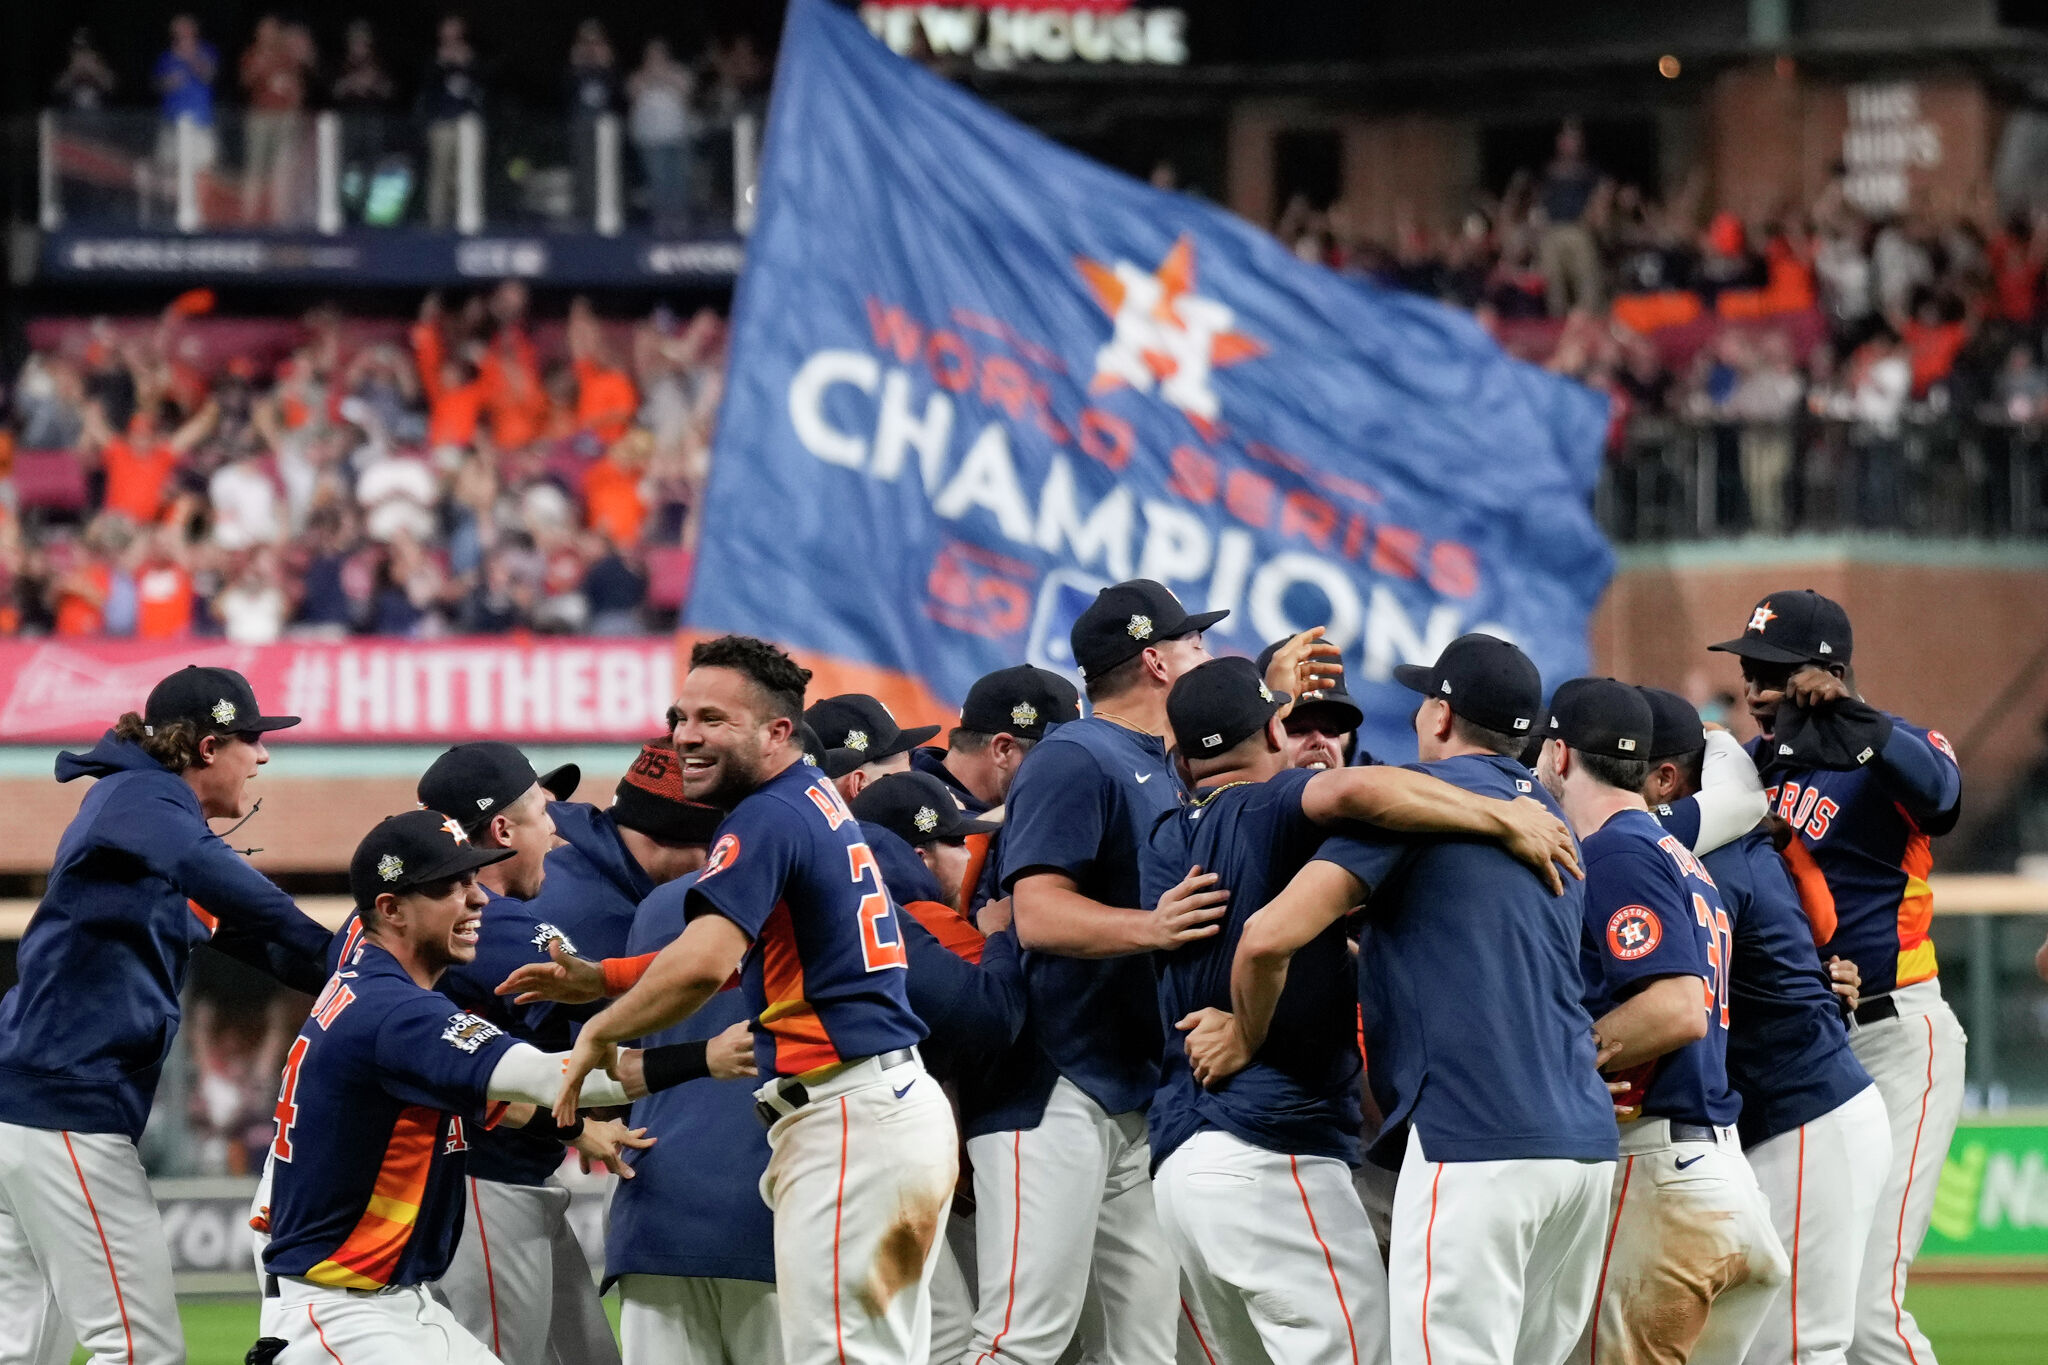 Official Houston Astros Alcs world series champions 2017 2022